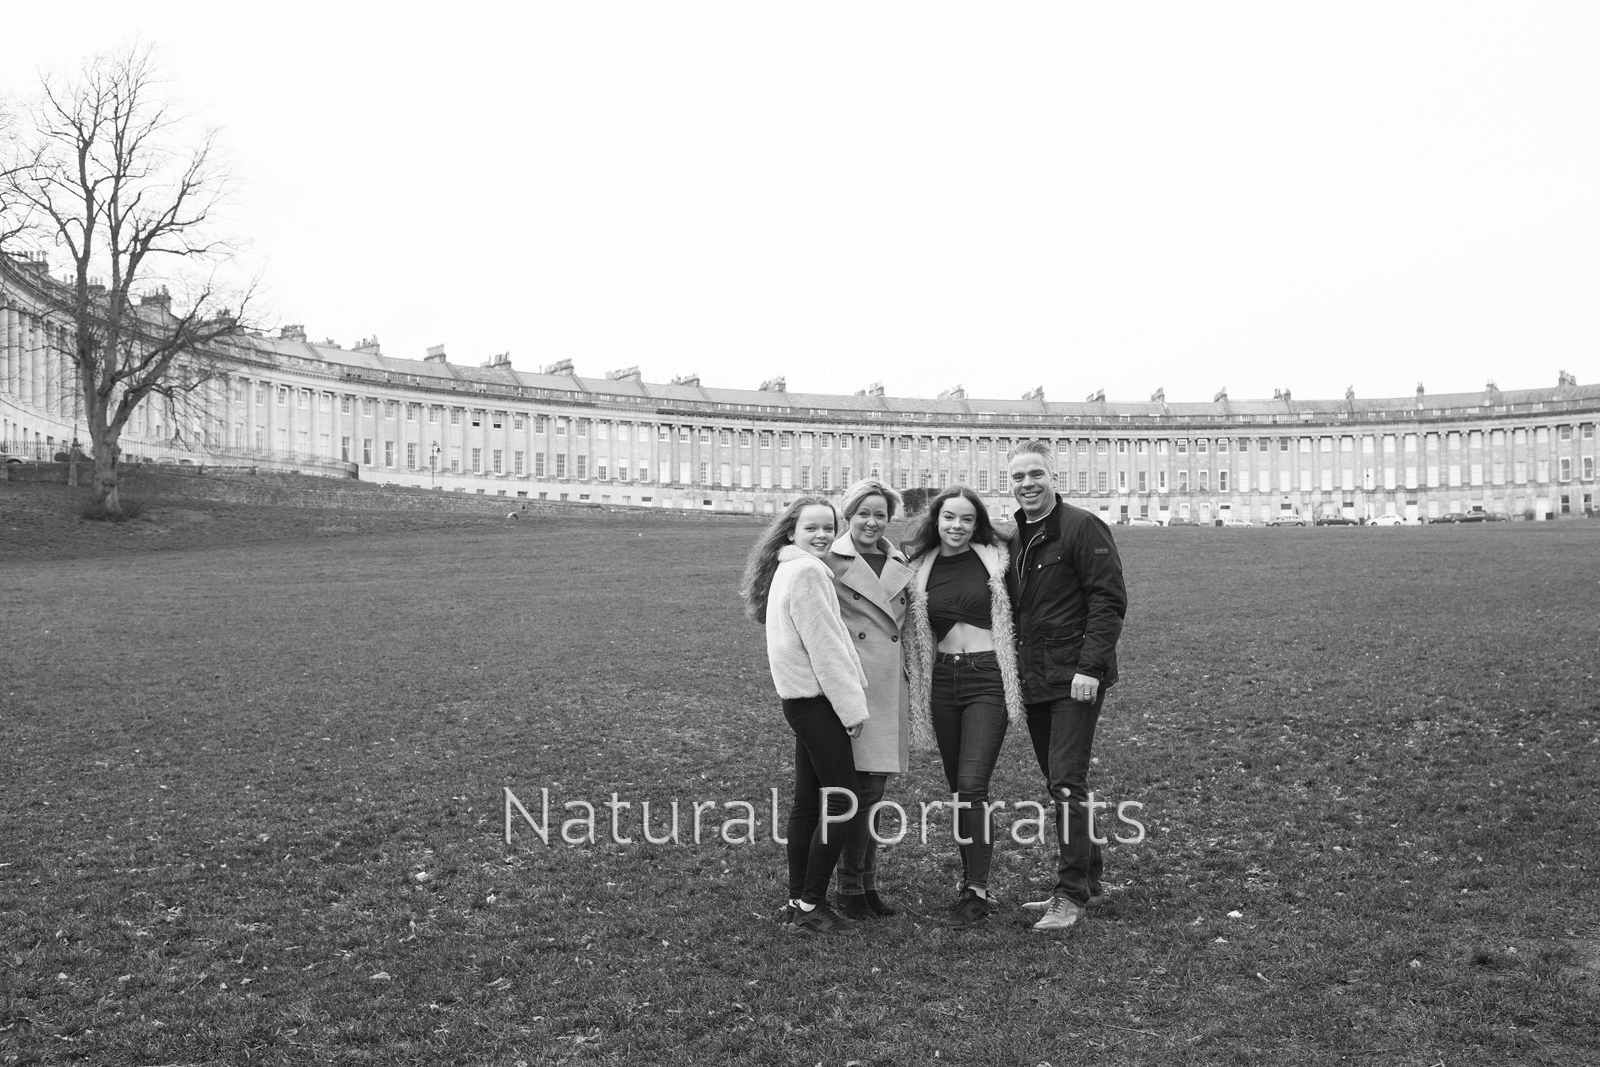 Family portrait at the Royal Crescent in Bath